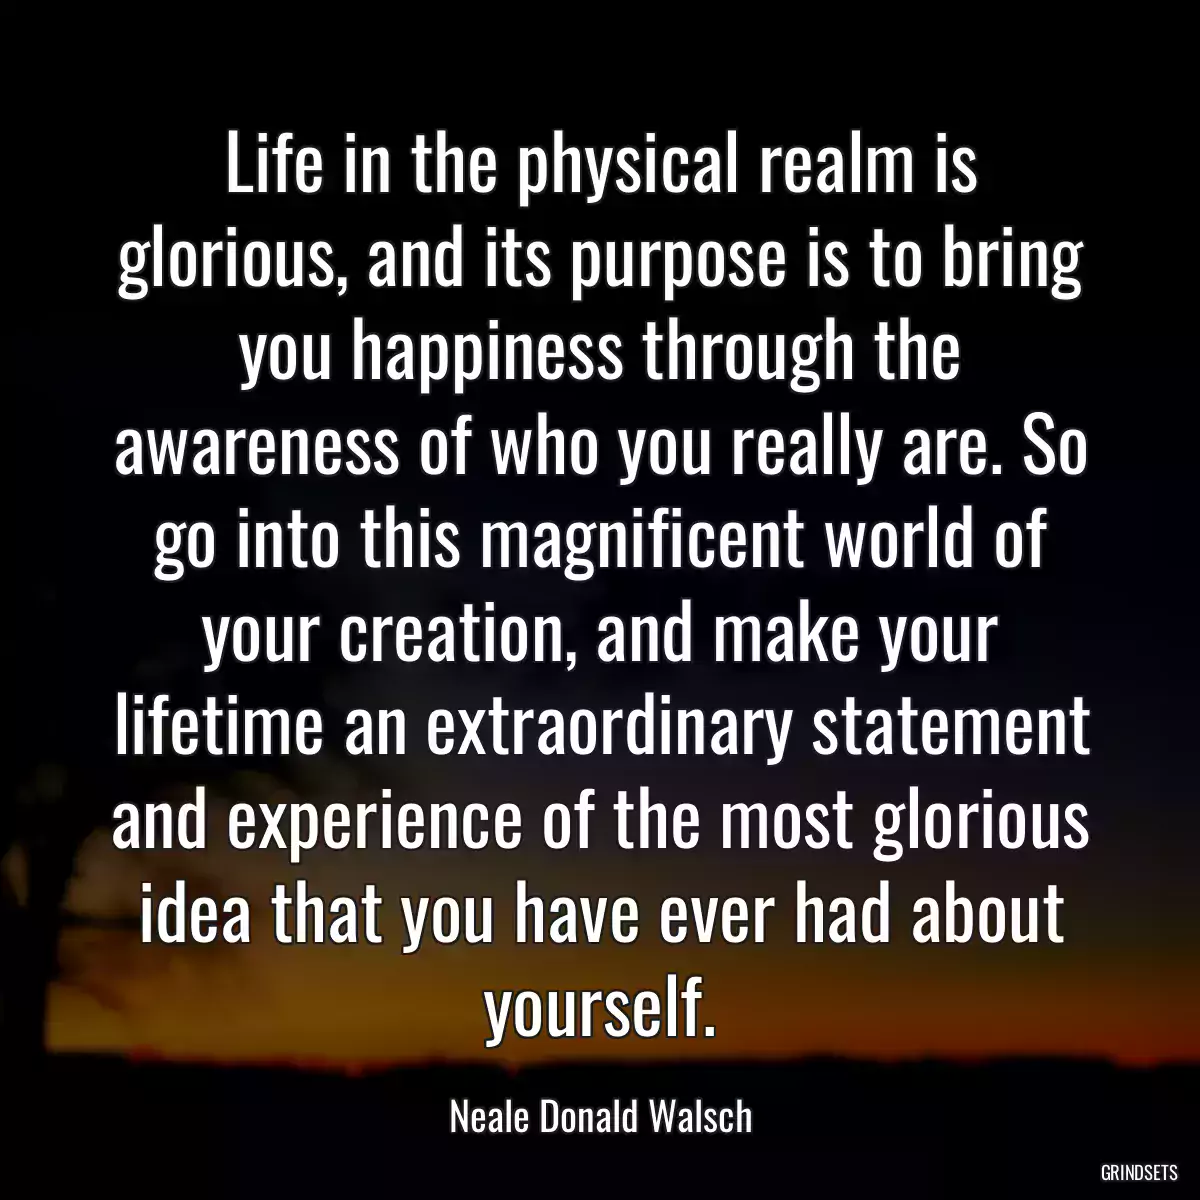 Life in the physical realm is glorious, and its purpose is to bring you happiness through the awareness of who you really are. So go into this magnificent world of your creation, and make your lifetime an extraordinary statement and experience of the most glorious idea that you have ever had about yourself.